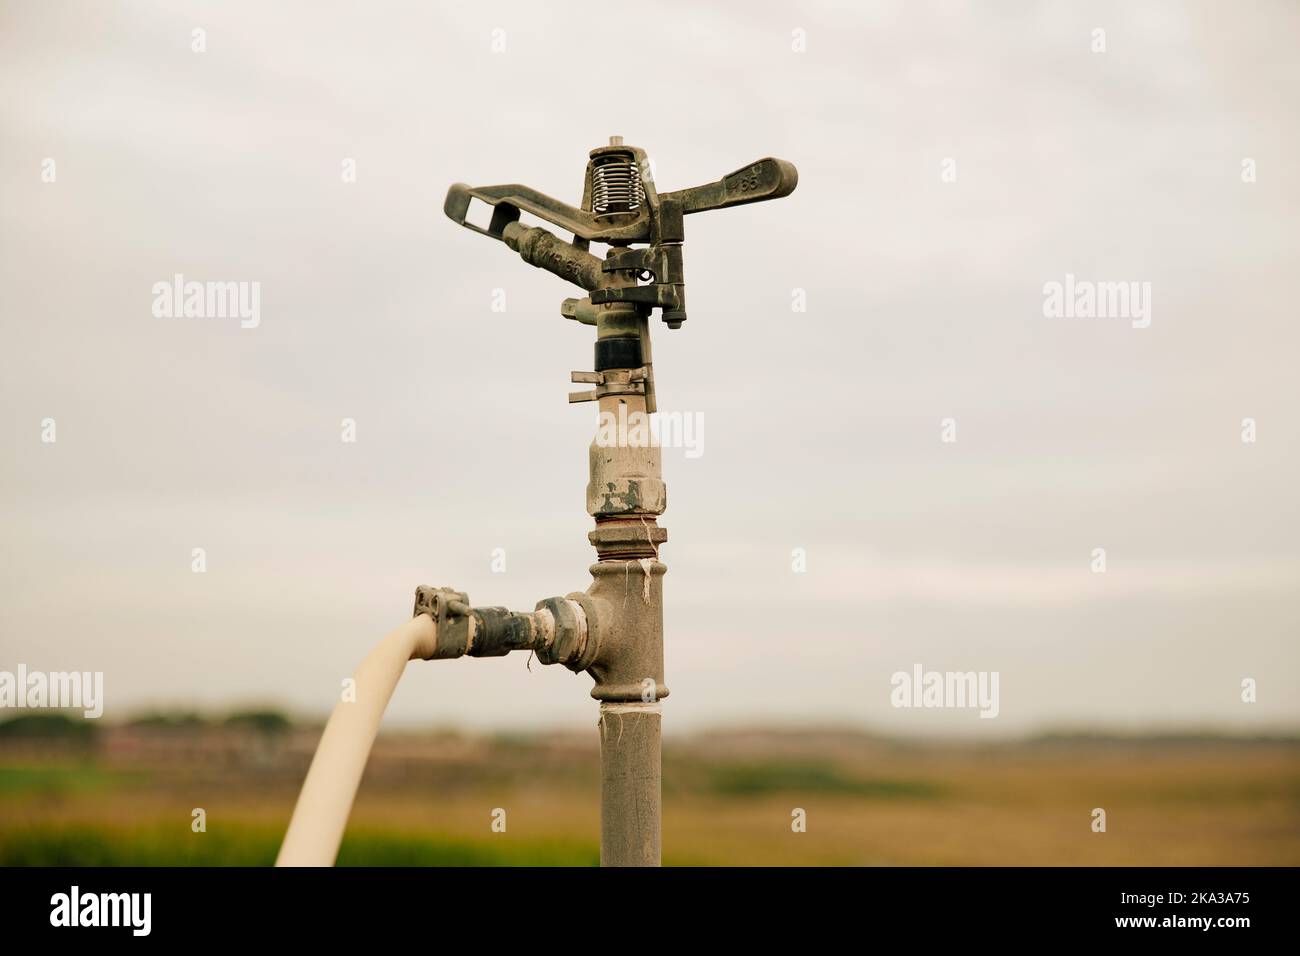 Close-up of a sprinkler irrigation system for the field Stock Photo